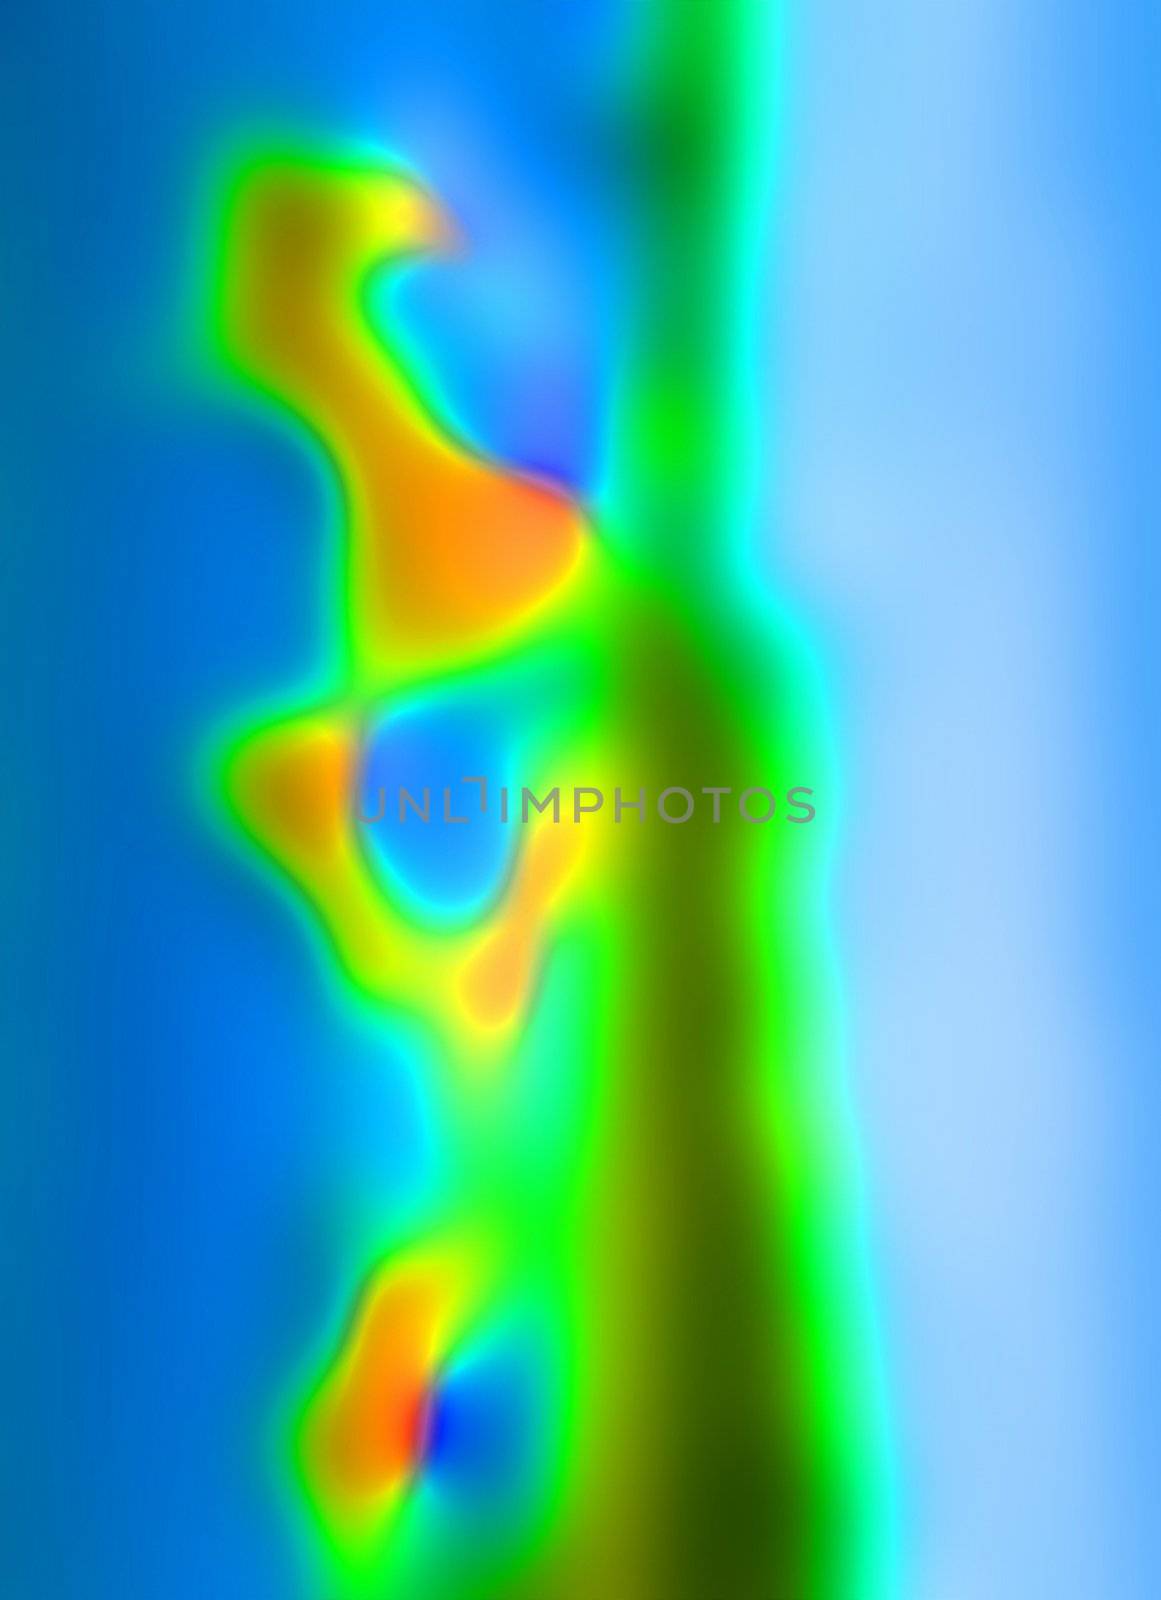 Multicoloured background resembling the melting fluid in a lava lamp. Suitable for scrapbooking, web design and other projects